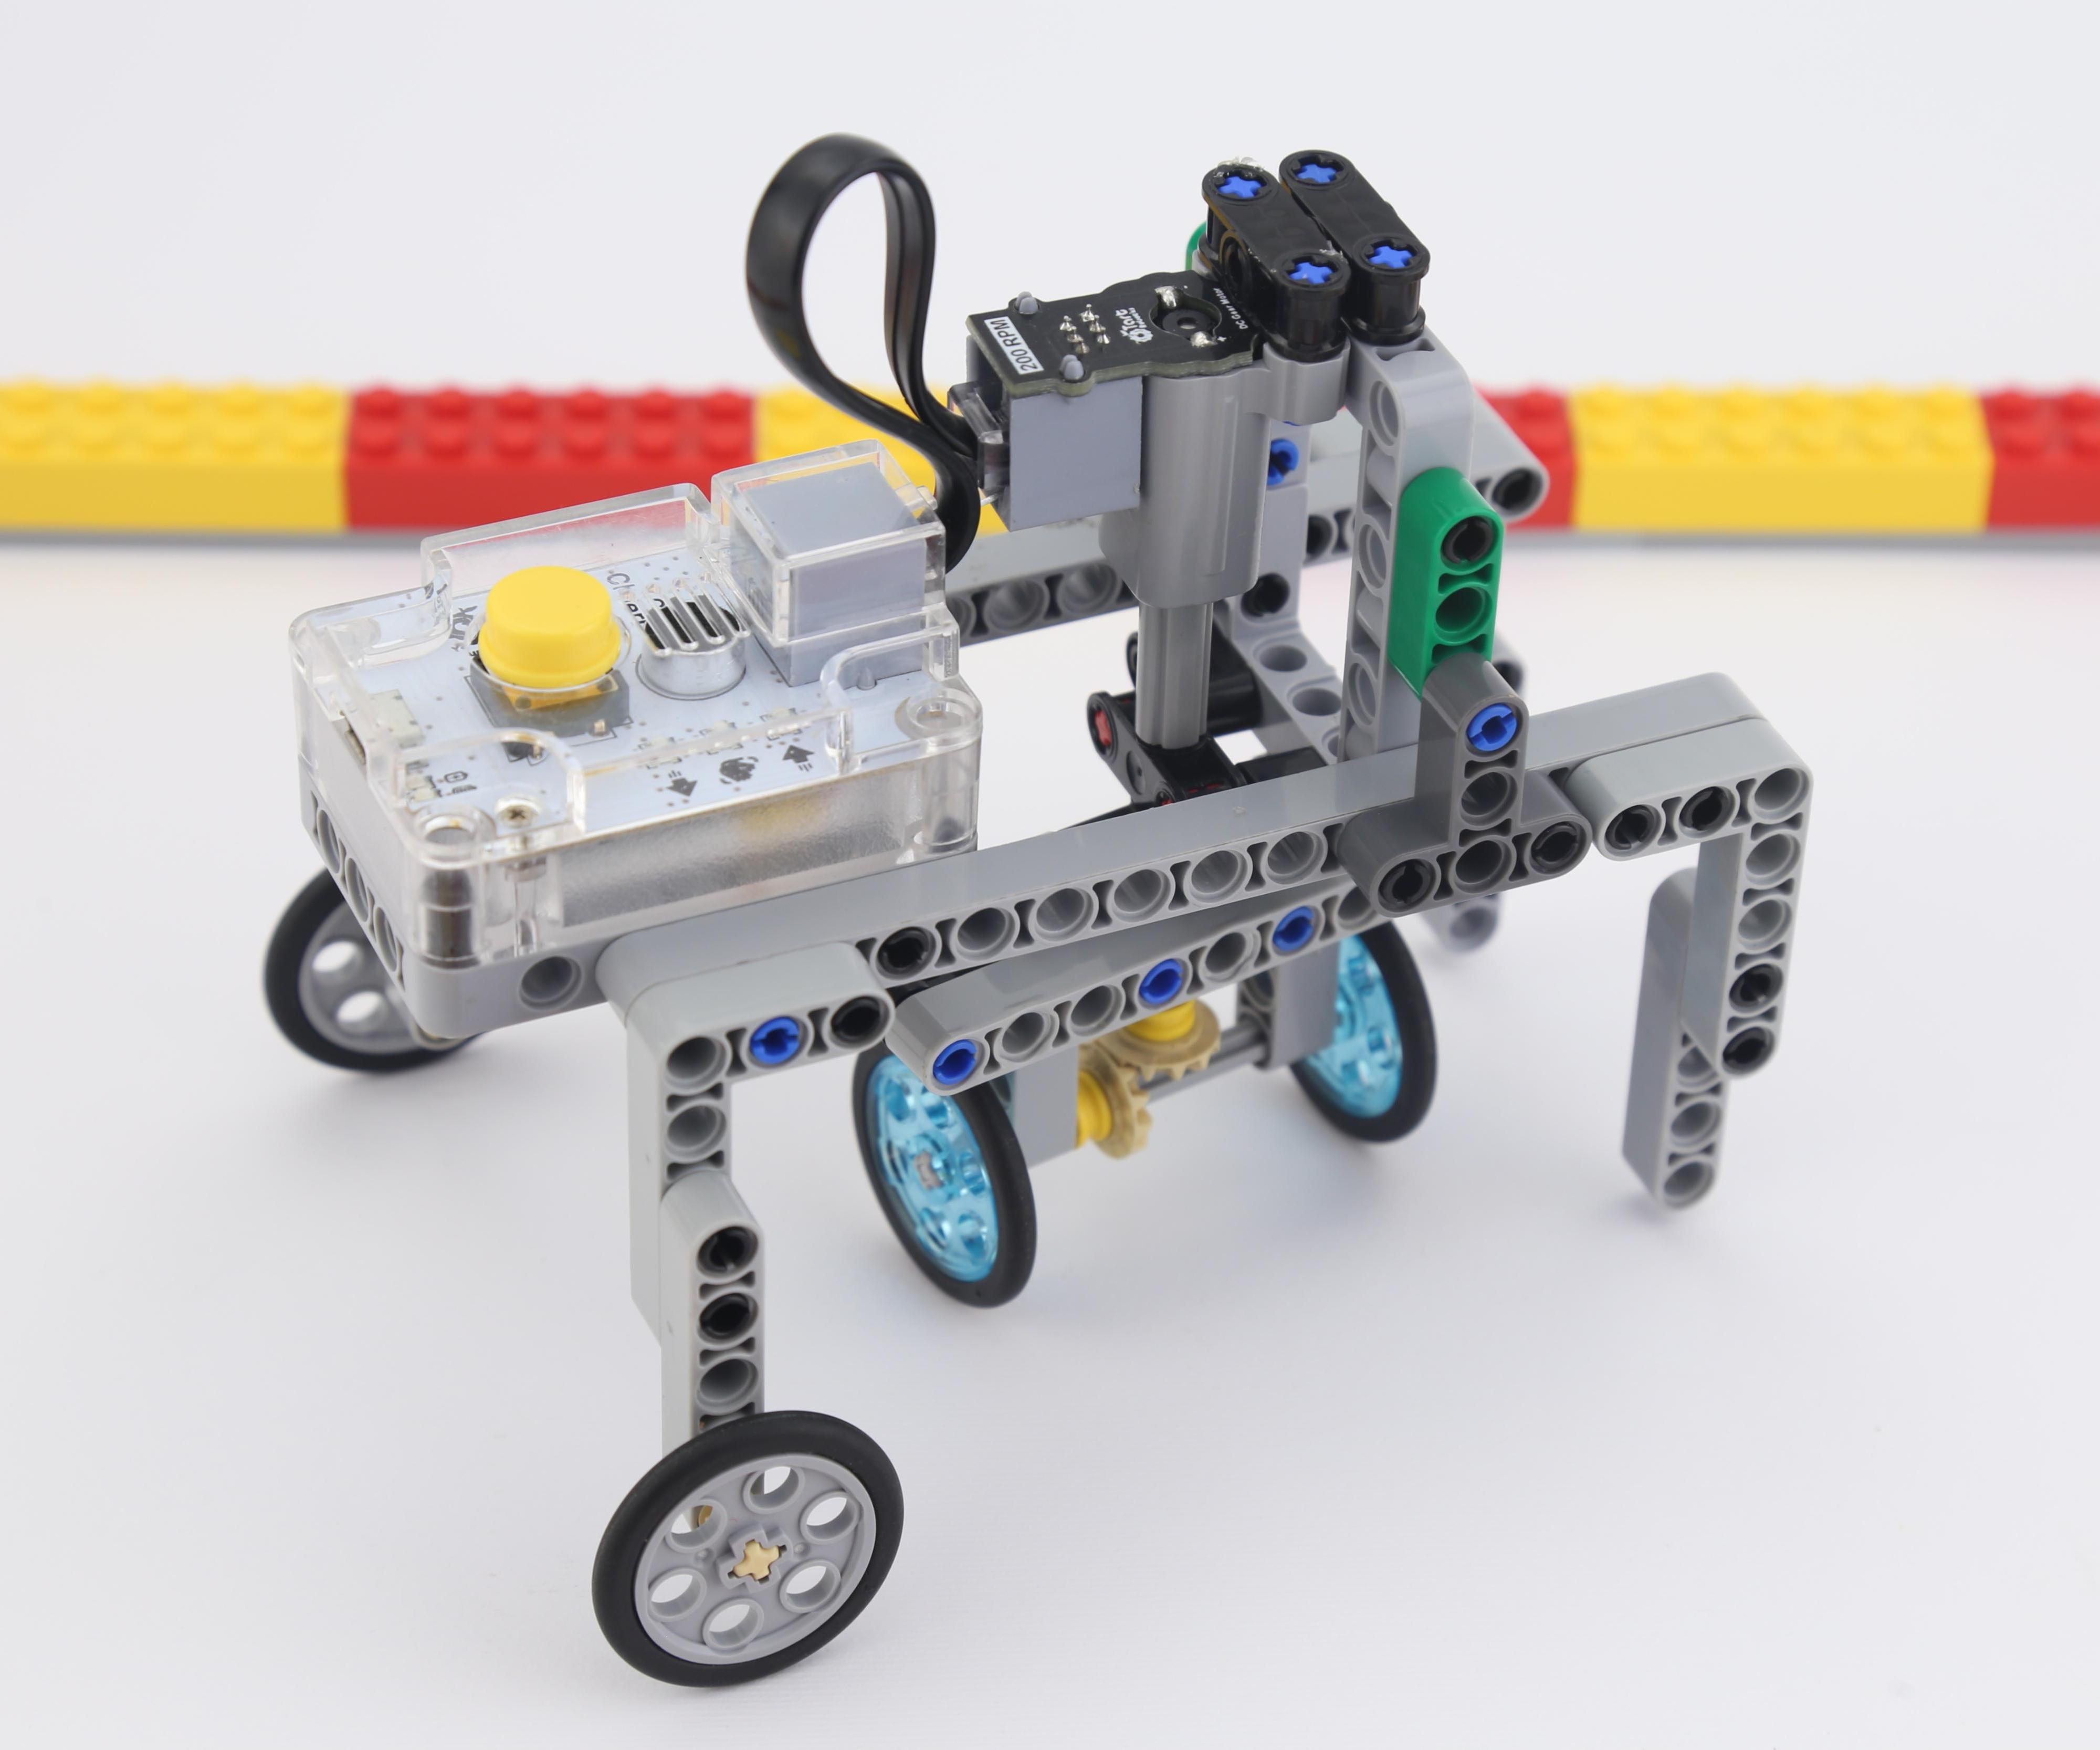 Build LEGO®-compatible and Interactive Unstoppabe Discovery Robot for Kids